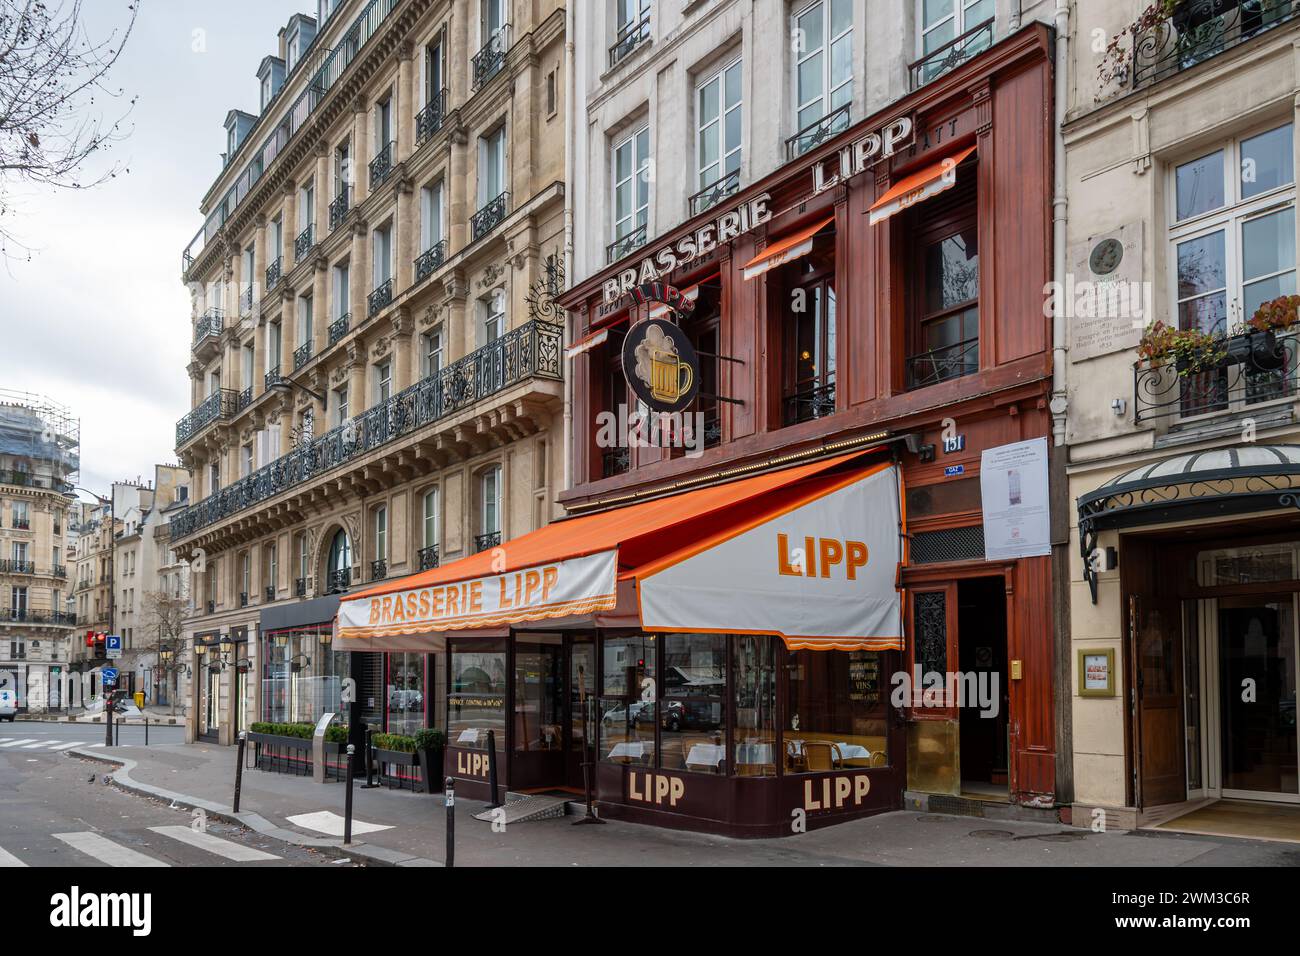 Exterior view of Brasserie Lipp, a famous traditional Parisian brasserie located in the Saint-Germain-des-Pres district of Paris, France Stock Photo